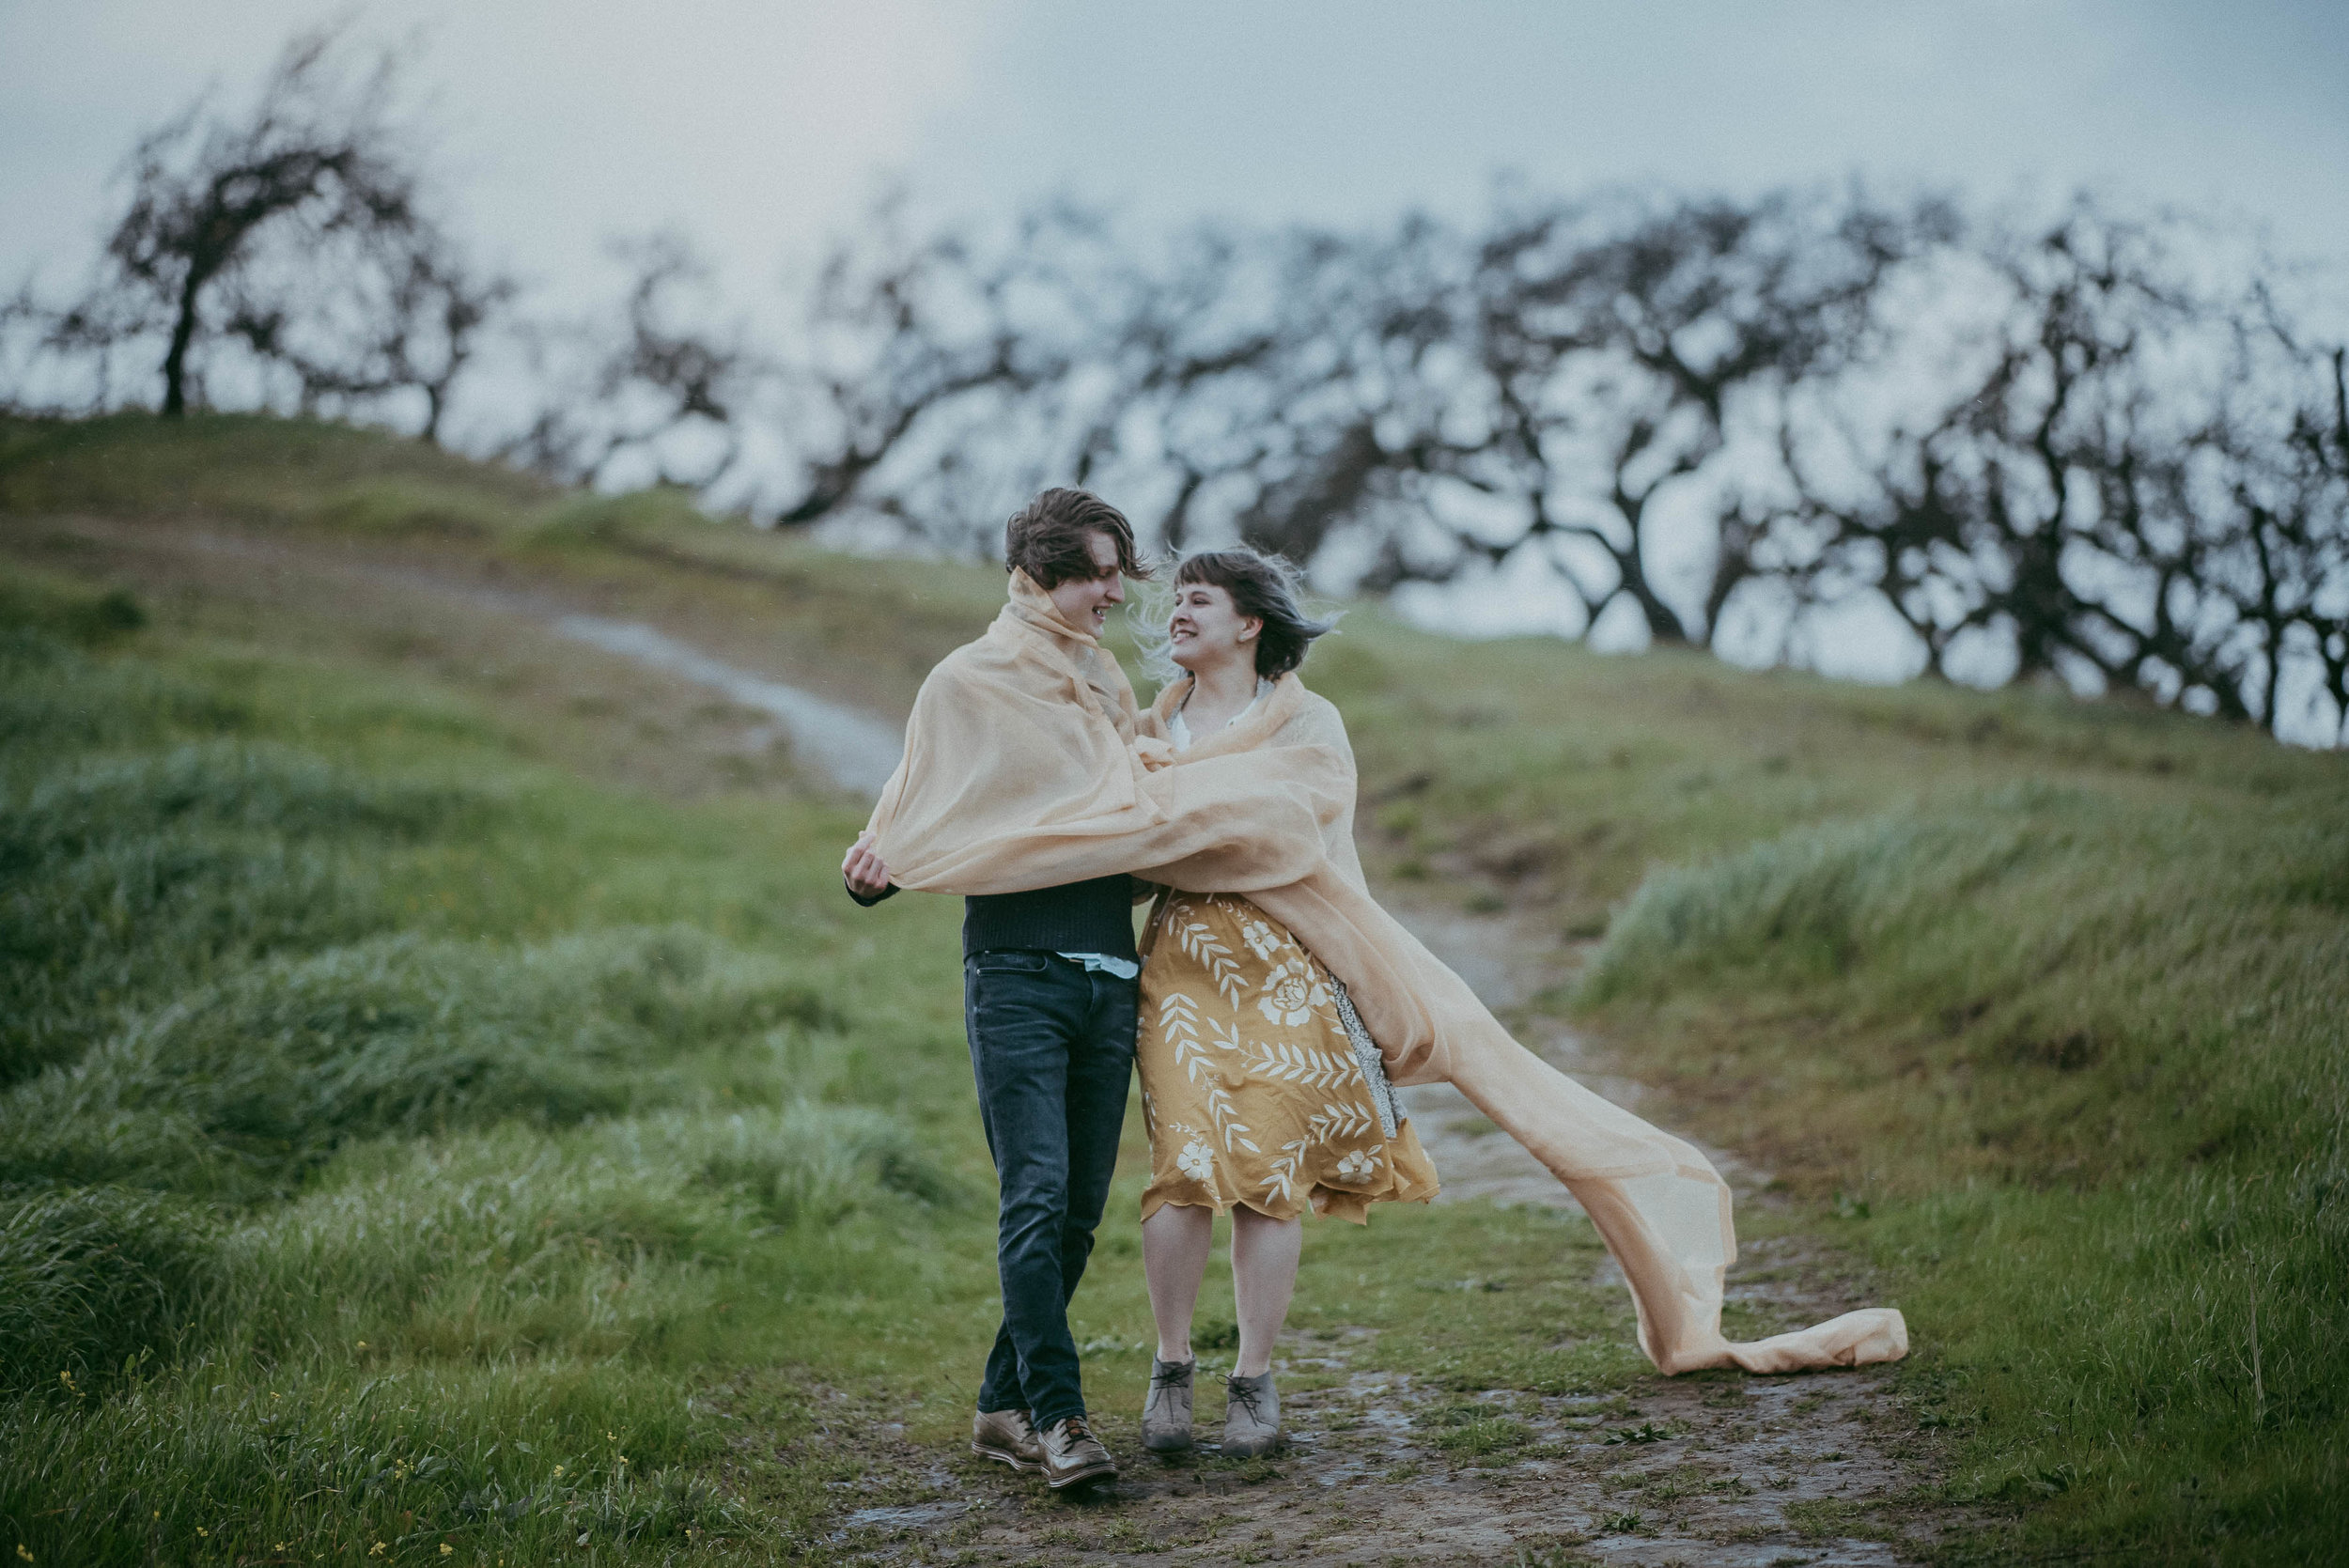 Lets_Spread_Beauty_Engagement Session20190212_000278.jpg